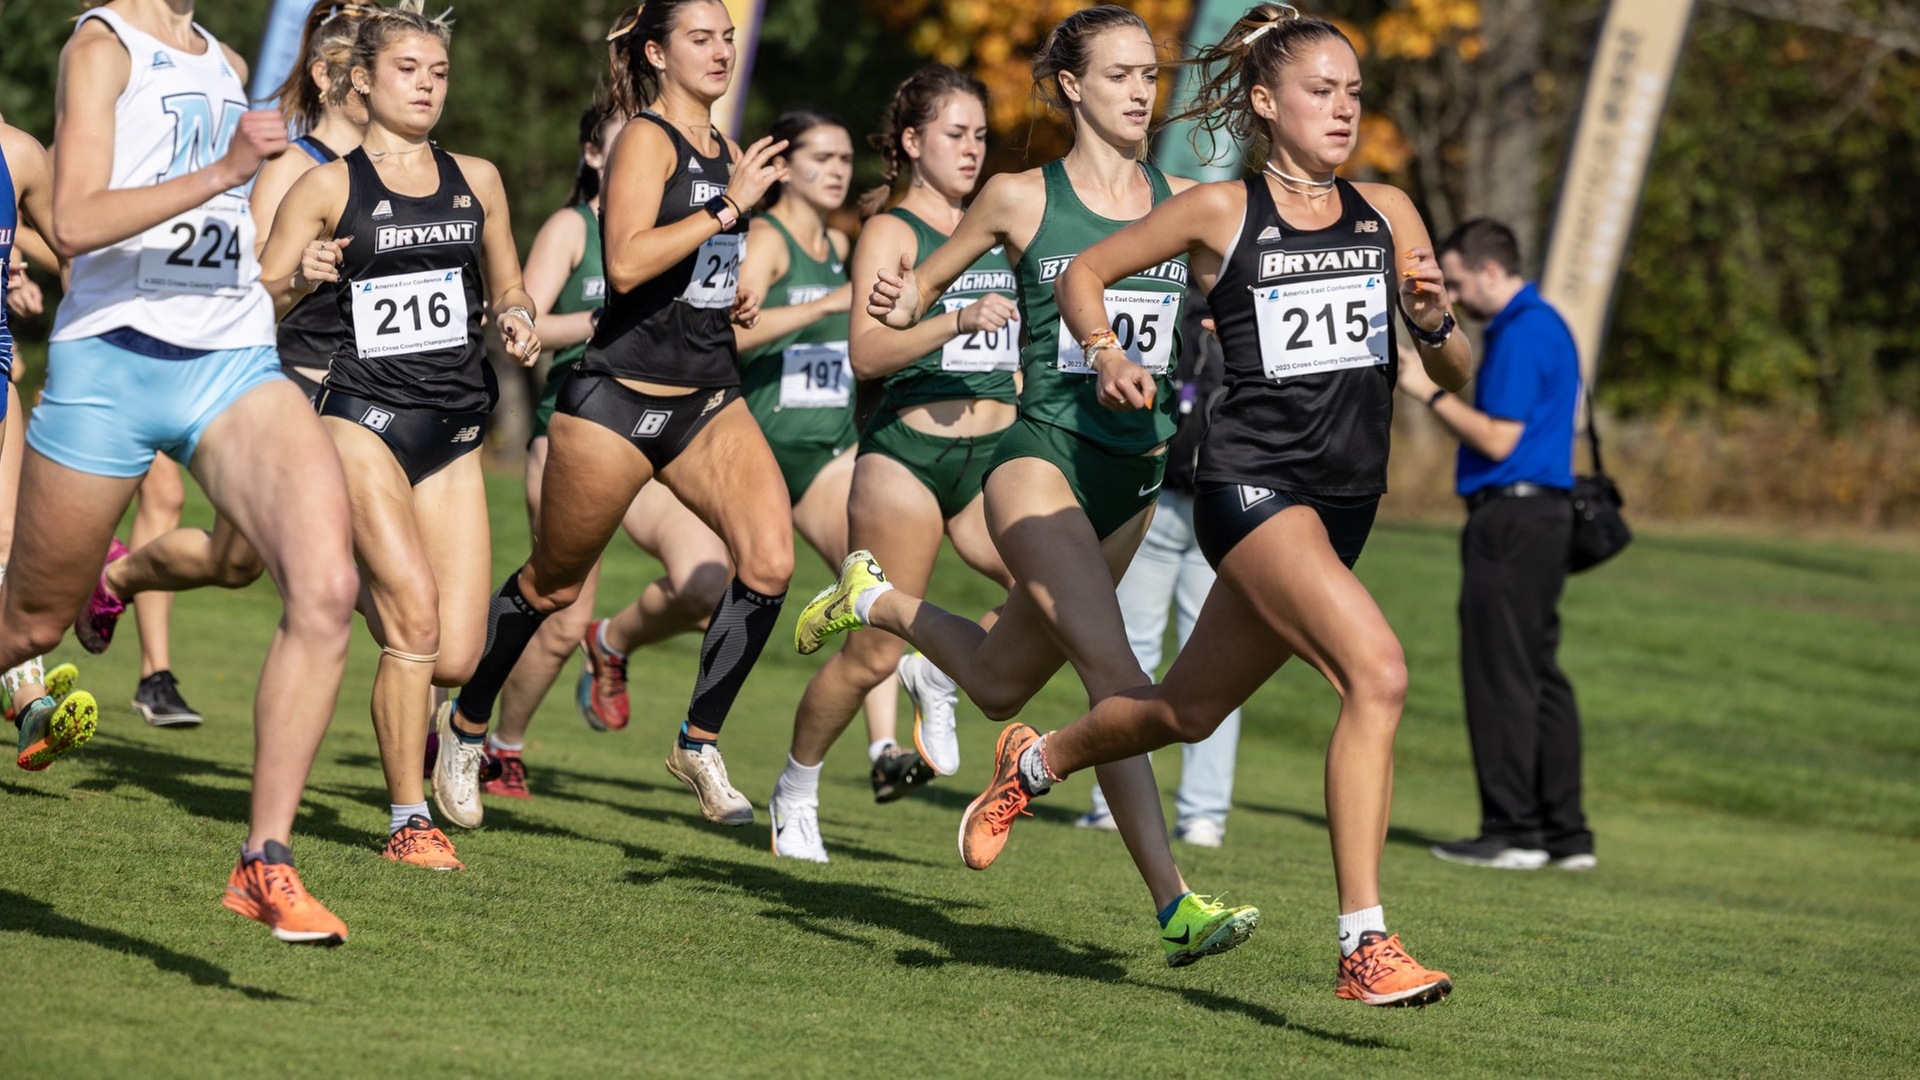 Women&rsquo;s Cross Country Records Highest Program Finish at Northeast Regionals